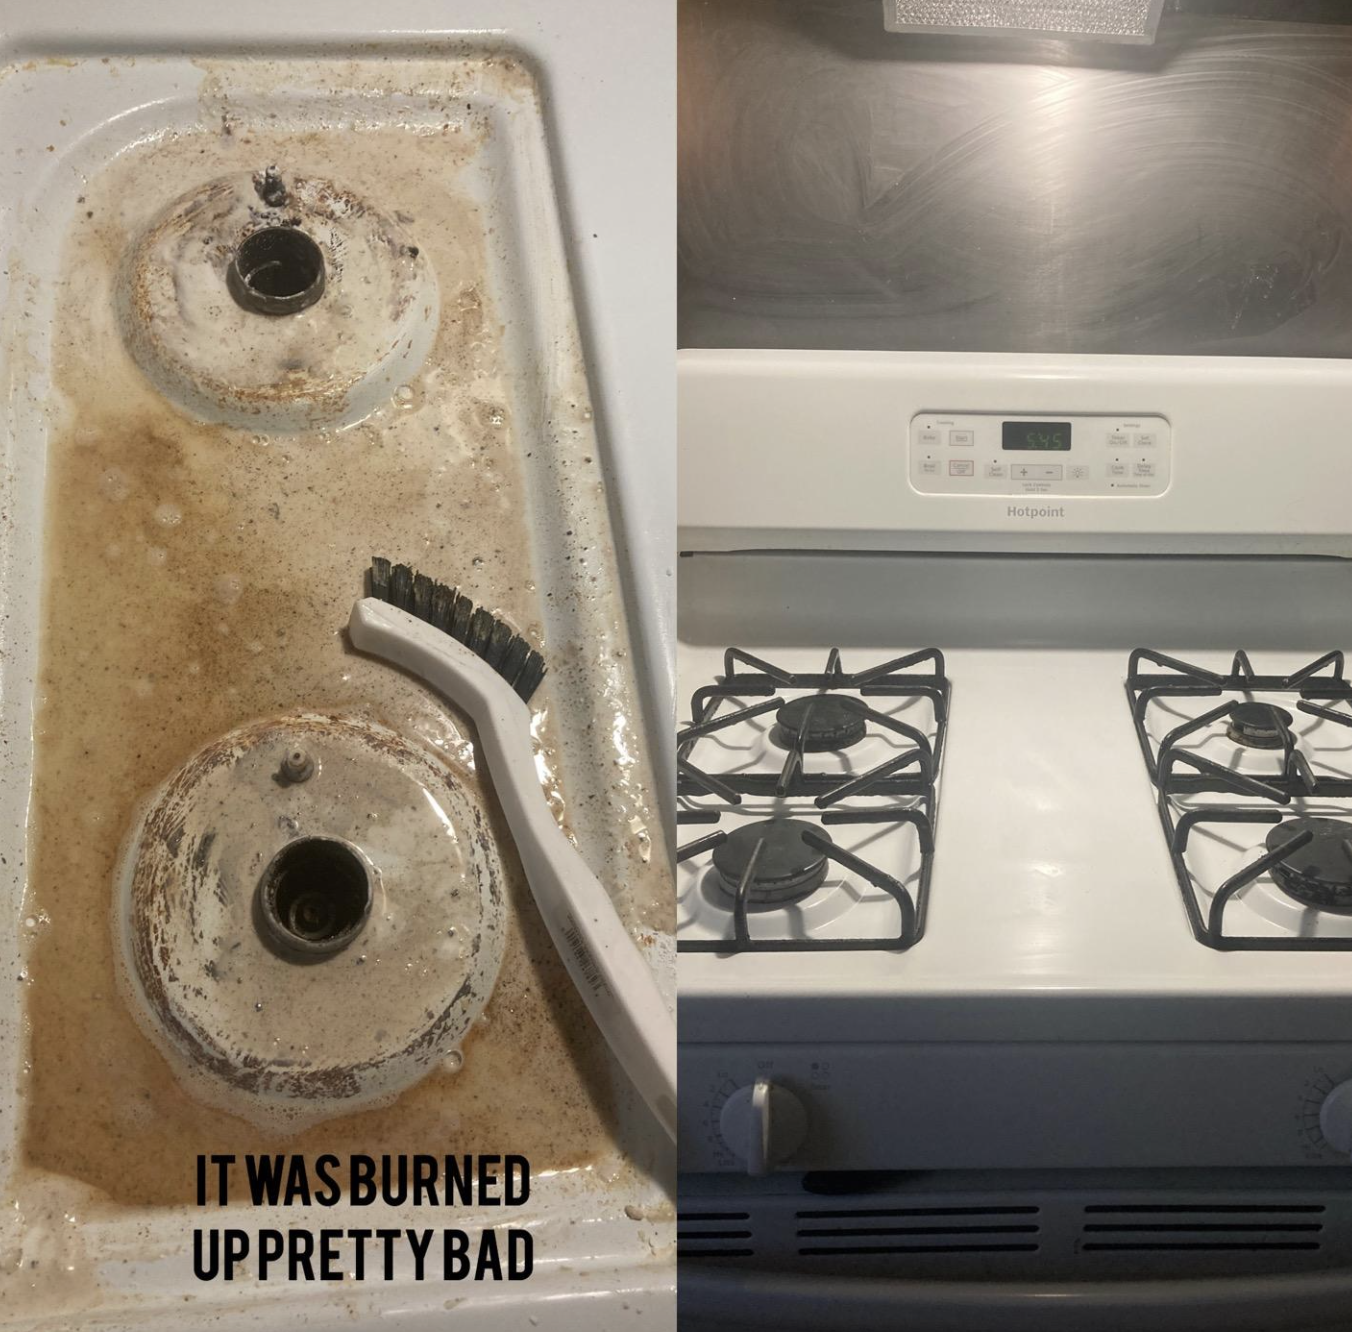 A customer reviewer&#x27;s before and after photos which show a once extremely dirty white stovetop and now a completely clean stovetop